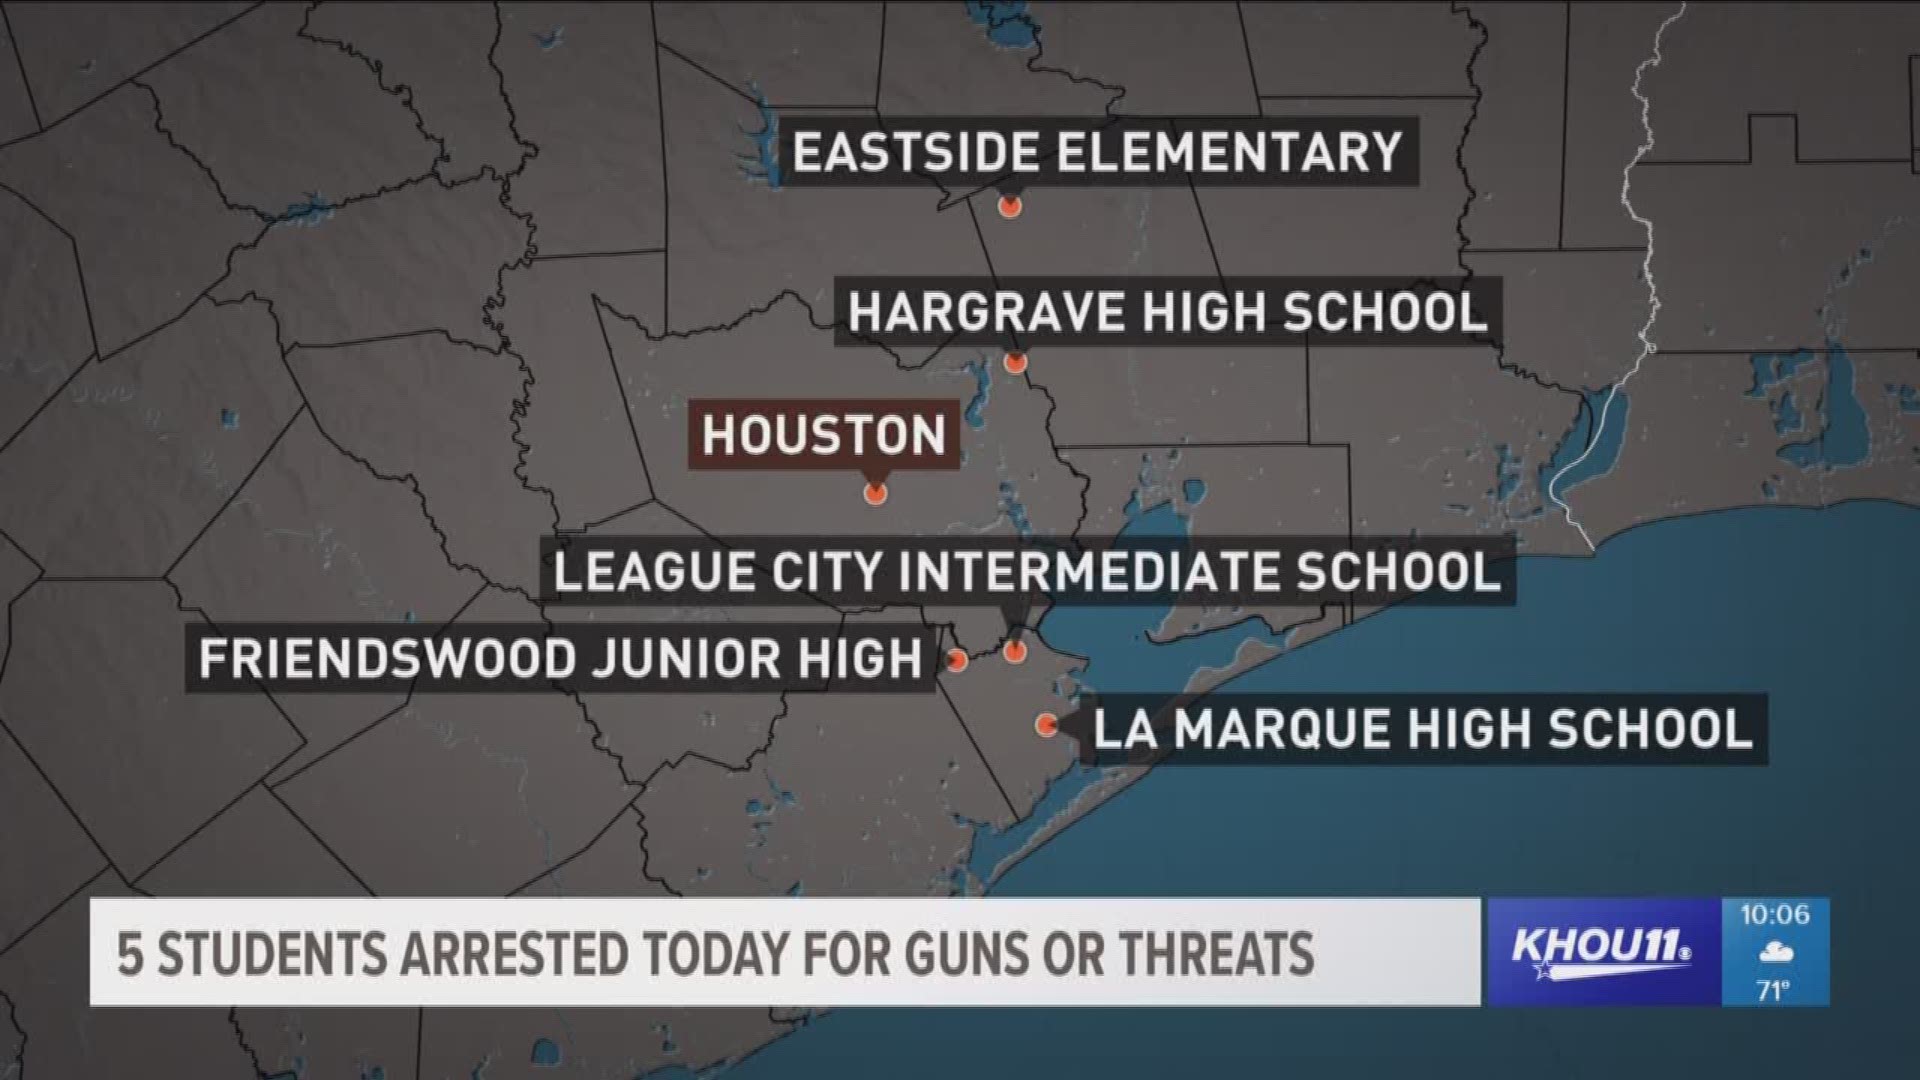 Three days after 10 people were shot and killed and 13 others injured at Santa Fe High School, five students were arrested on Monday in the Houston area for bringing weapons to school or making threats.